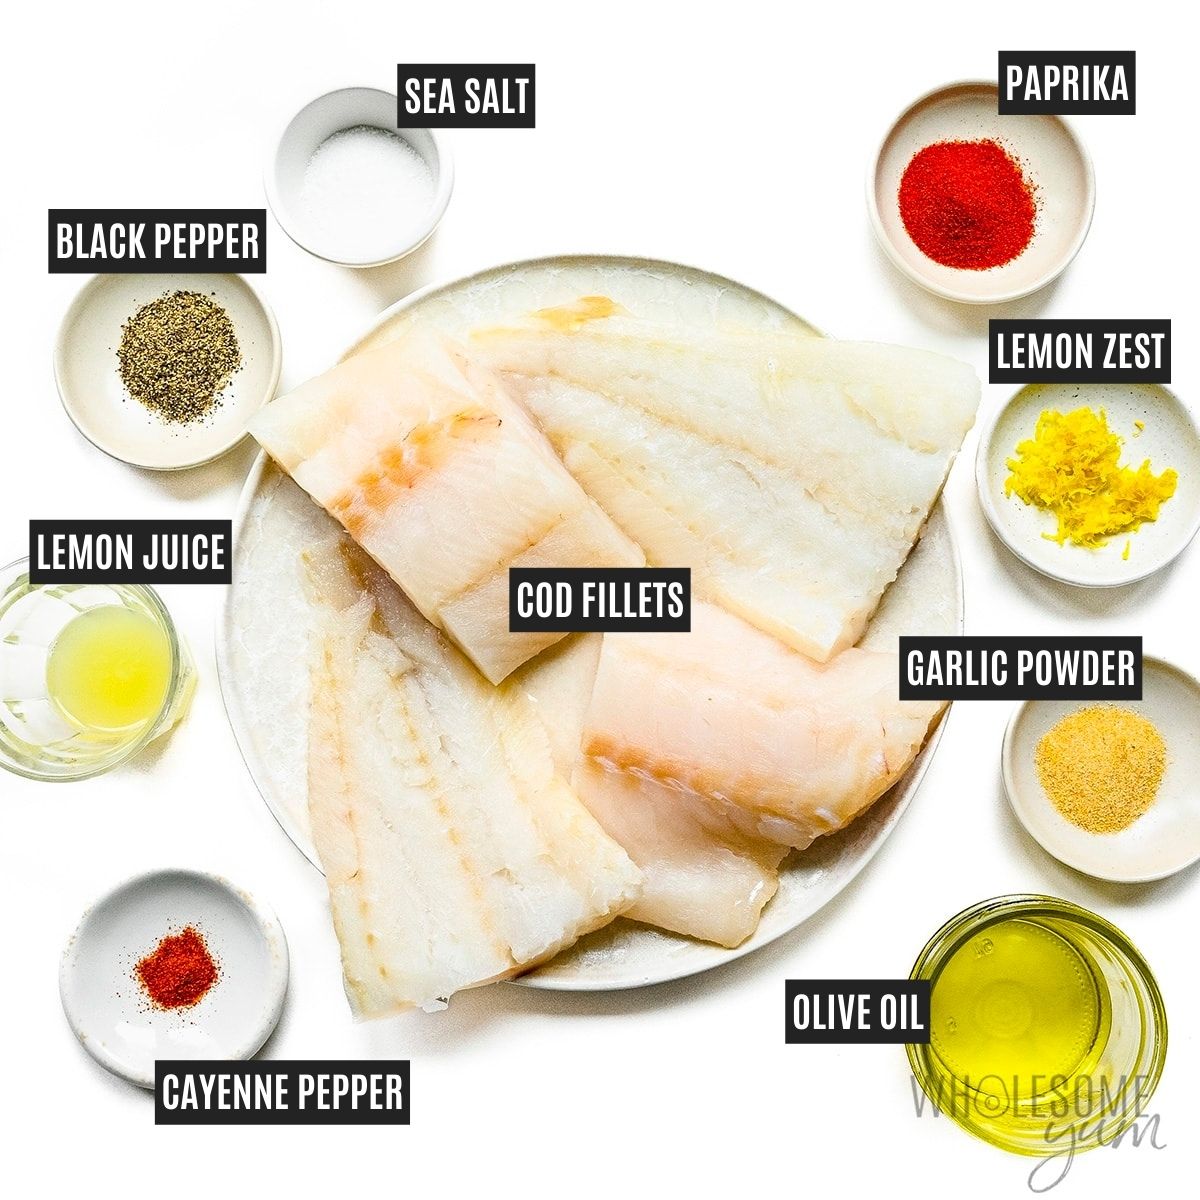 Cod fillets on a plate next to lemon juice and zest, olive oil, and spices in small bowls with labels.